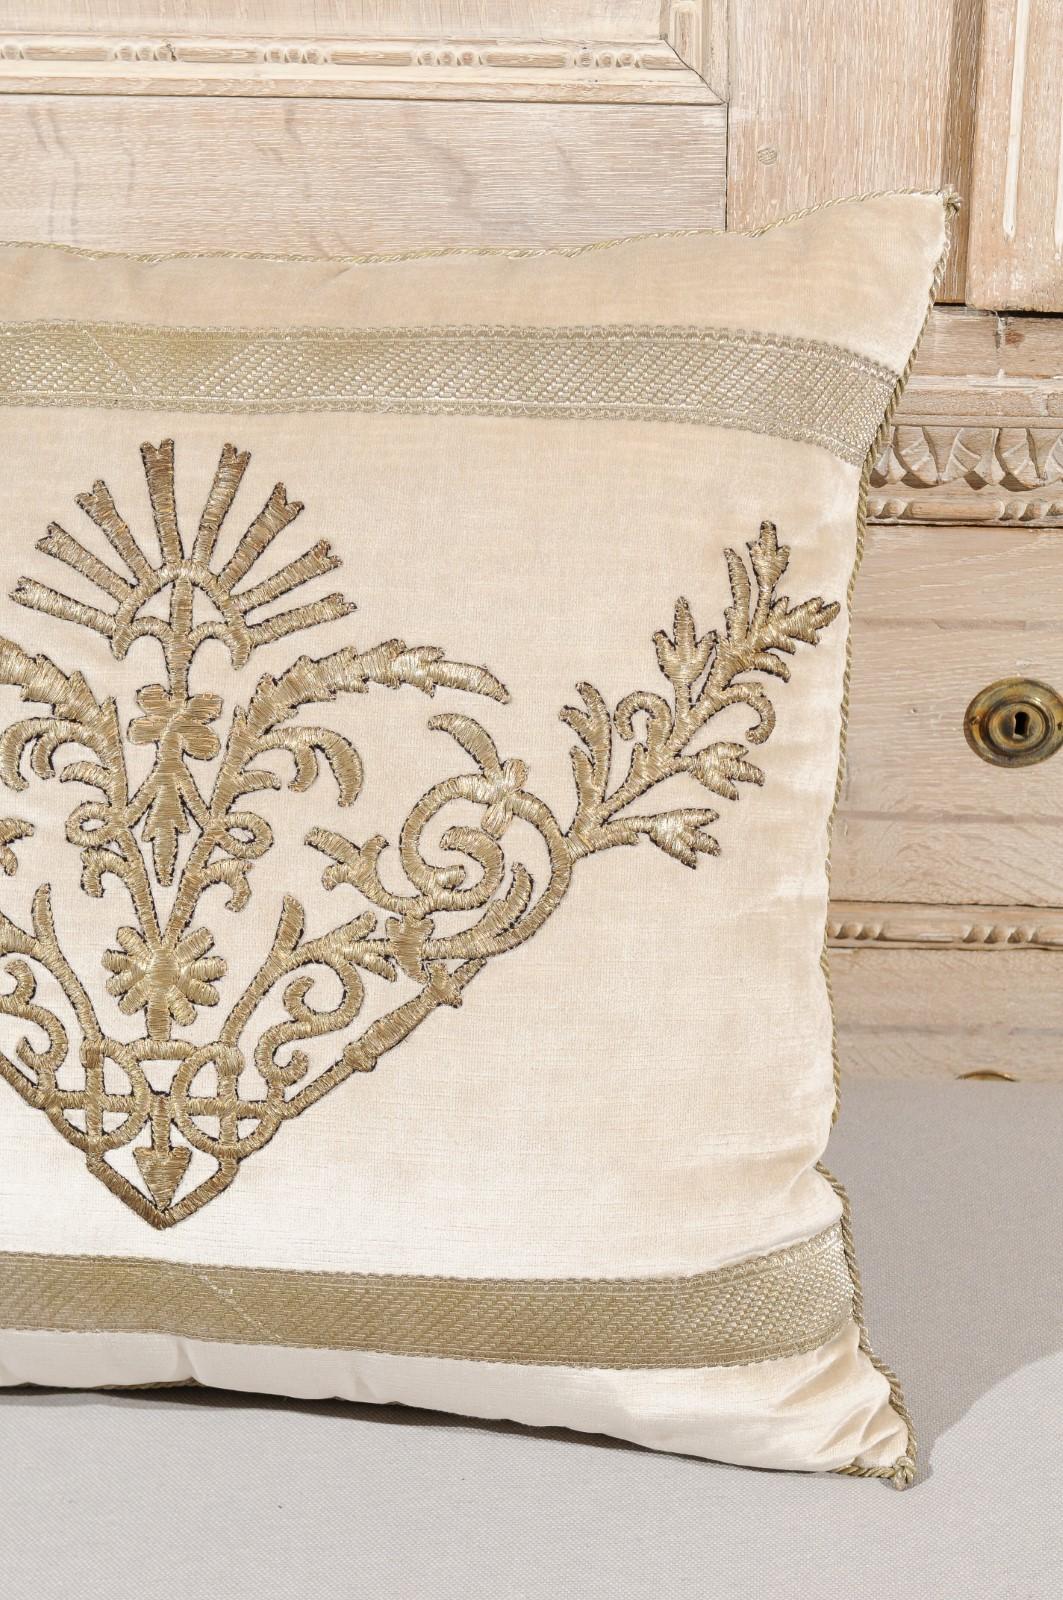 An antique Ottoman Empire raised silver metallic embroidery on oyster velvet fabric, made into a down-filled pillow. We currently have two pillows available, priced and sold individually. Made of an exquisite antique Ottoman Empire raised silver